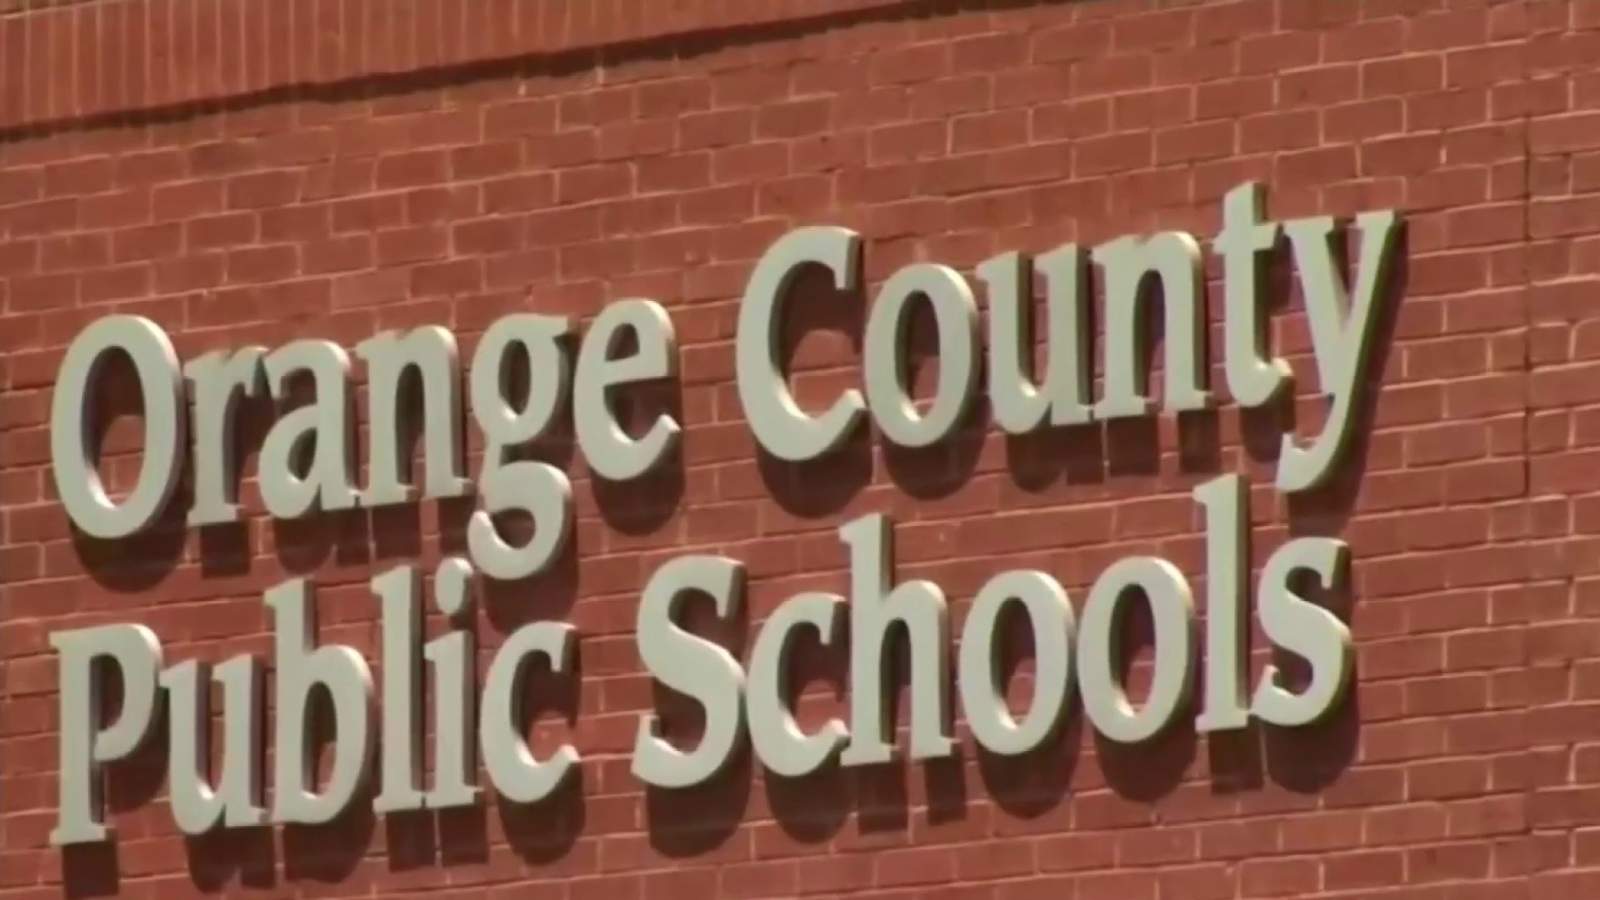 Orange County Public Schools reports highest daily COVID cases since reopening schools